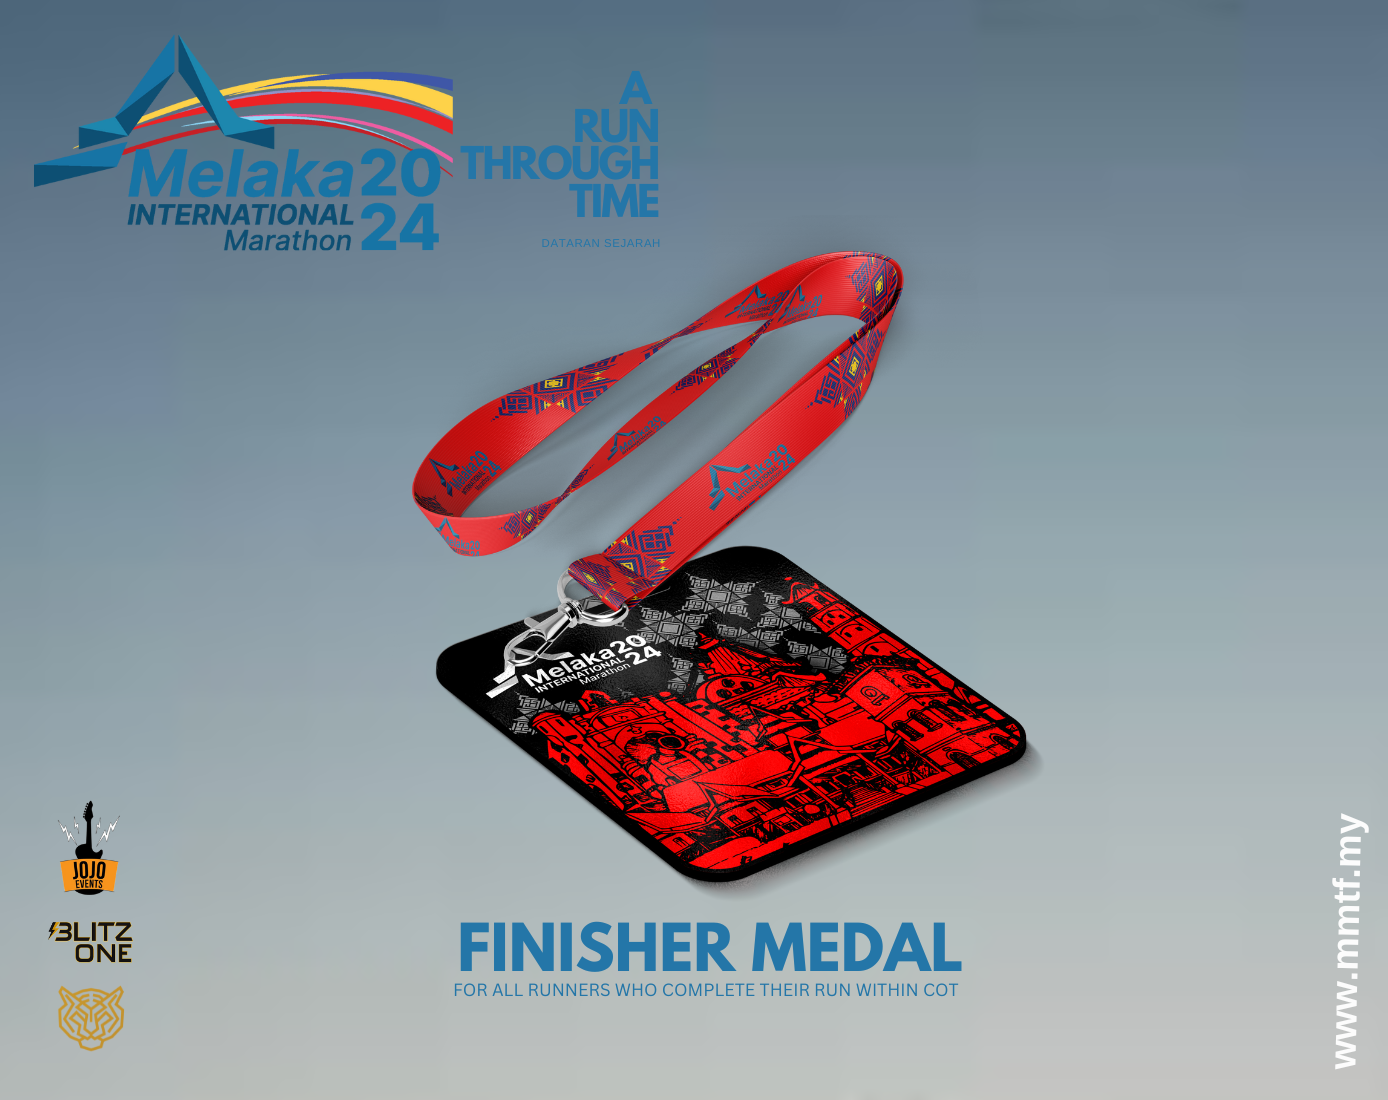 https://heyjom-production-assets.s3.ap-southeast-1.amazonaws.com/event_sections%2F1134%2FFinisher+Medal.png